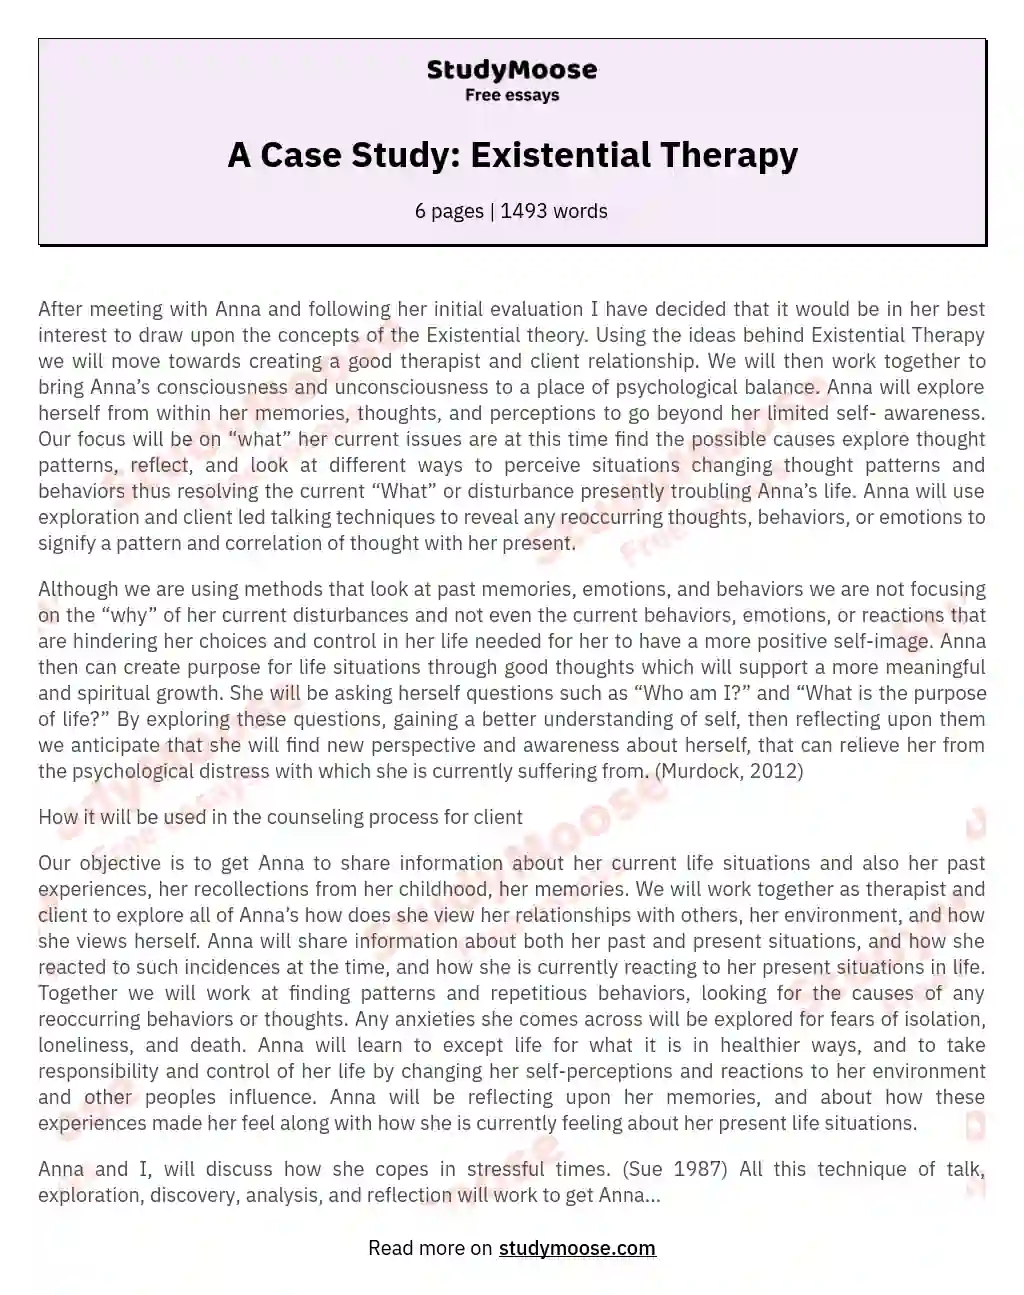 A Case Study: Existential Therapy